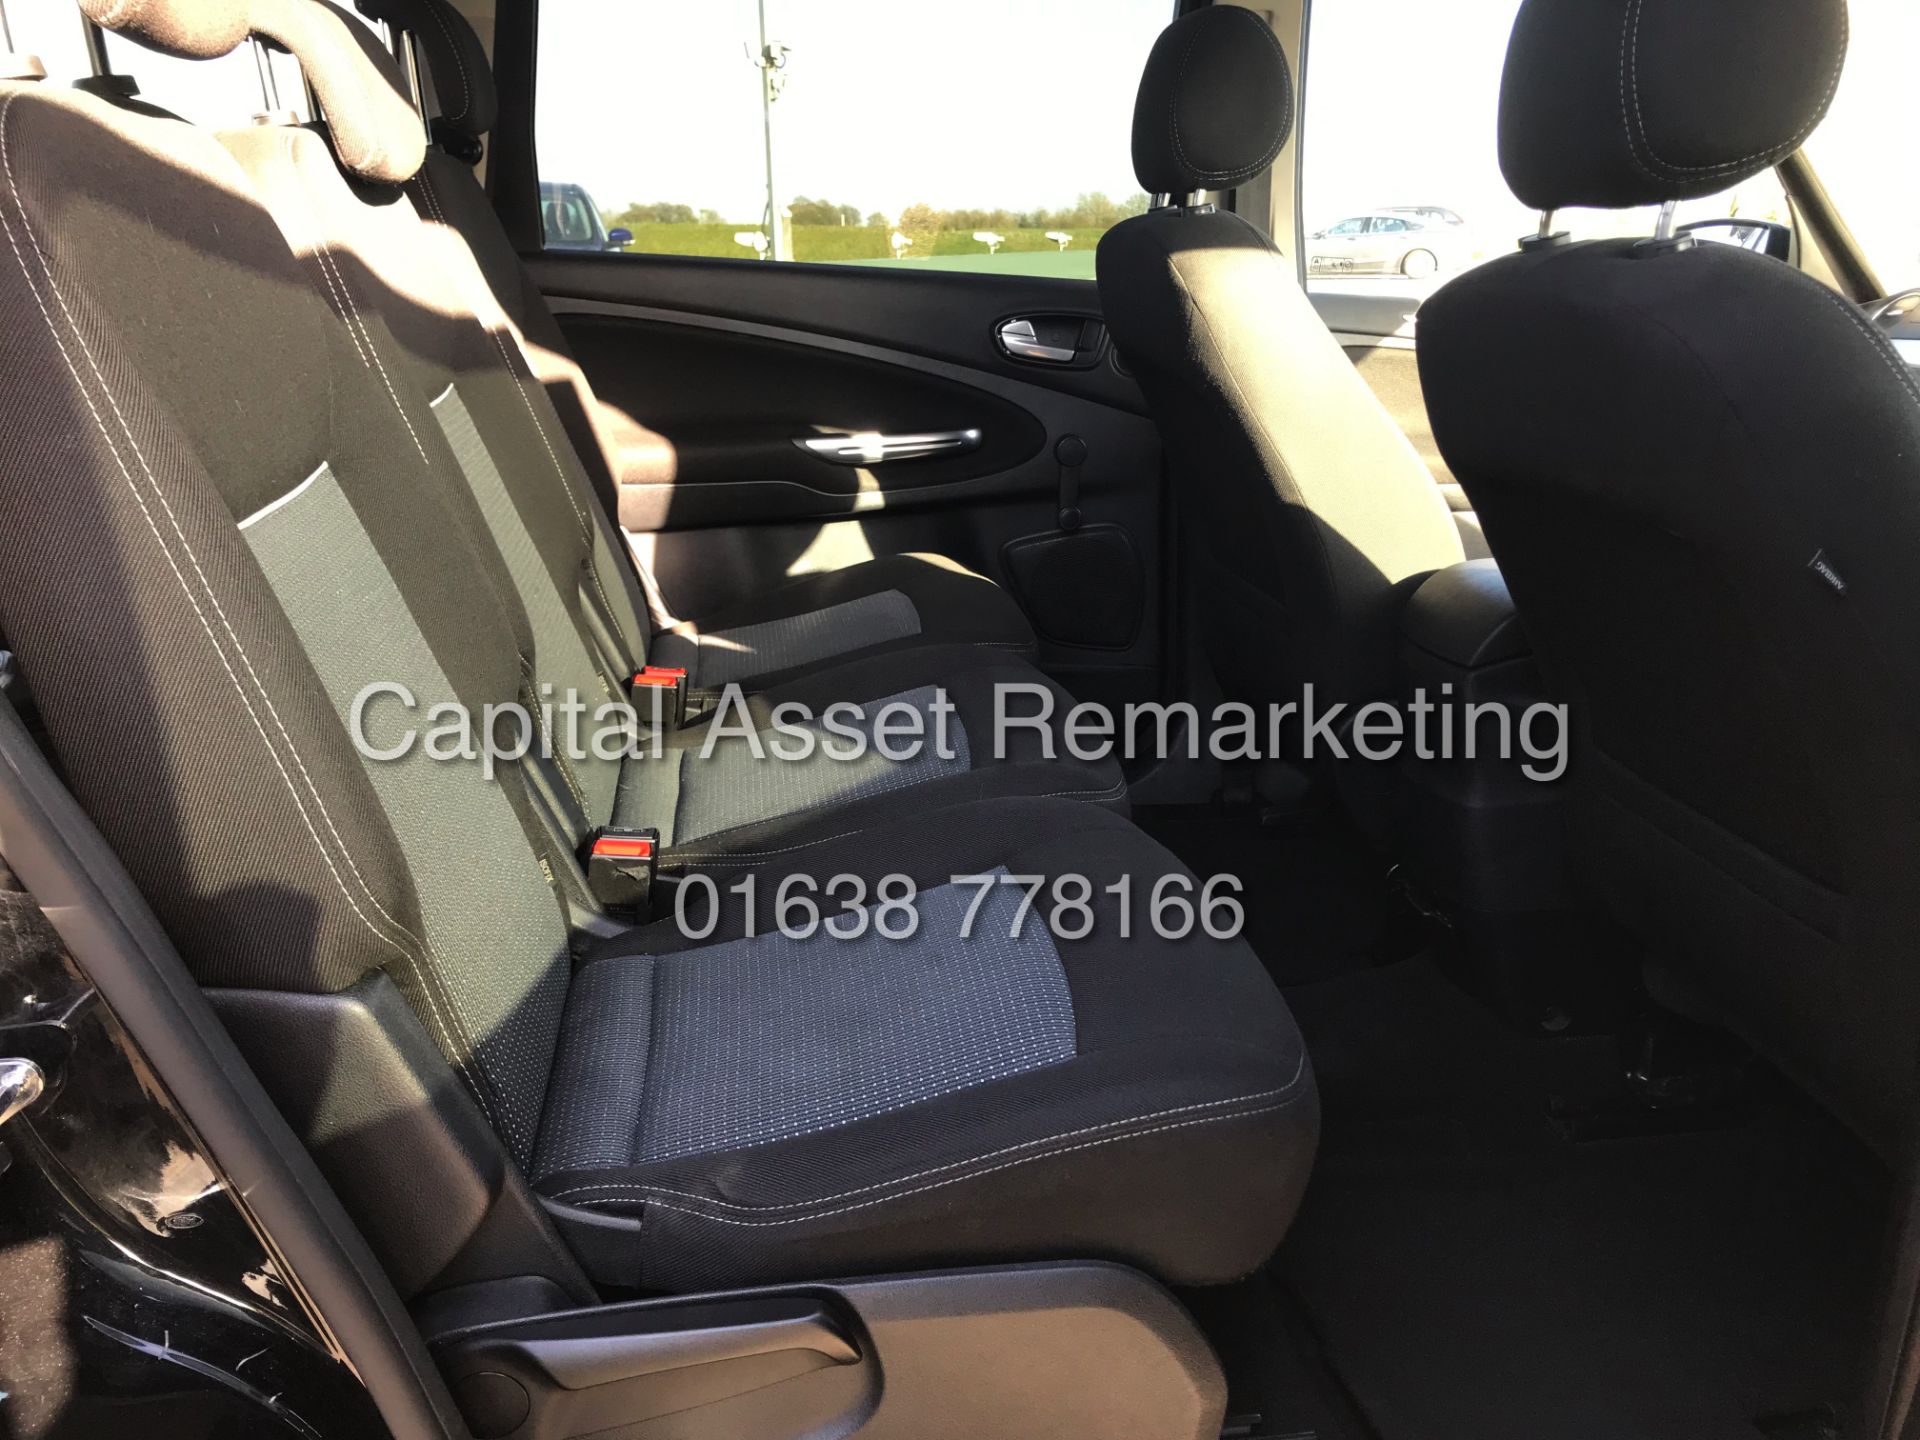 On Sale FORD GALAXY 2.0TDCI "ZETEC - POWERSHIFT" 7 SEATER (15 REG) AIR CON - 1 OWNER - 140BHP ENGINE - Image 9 of 17